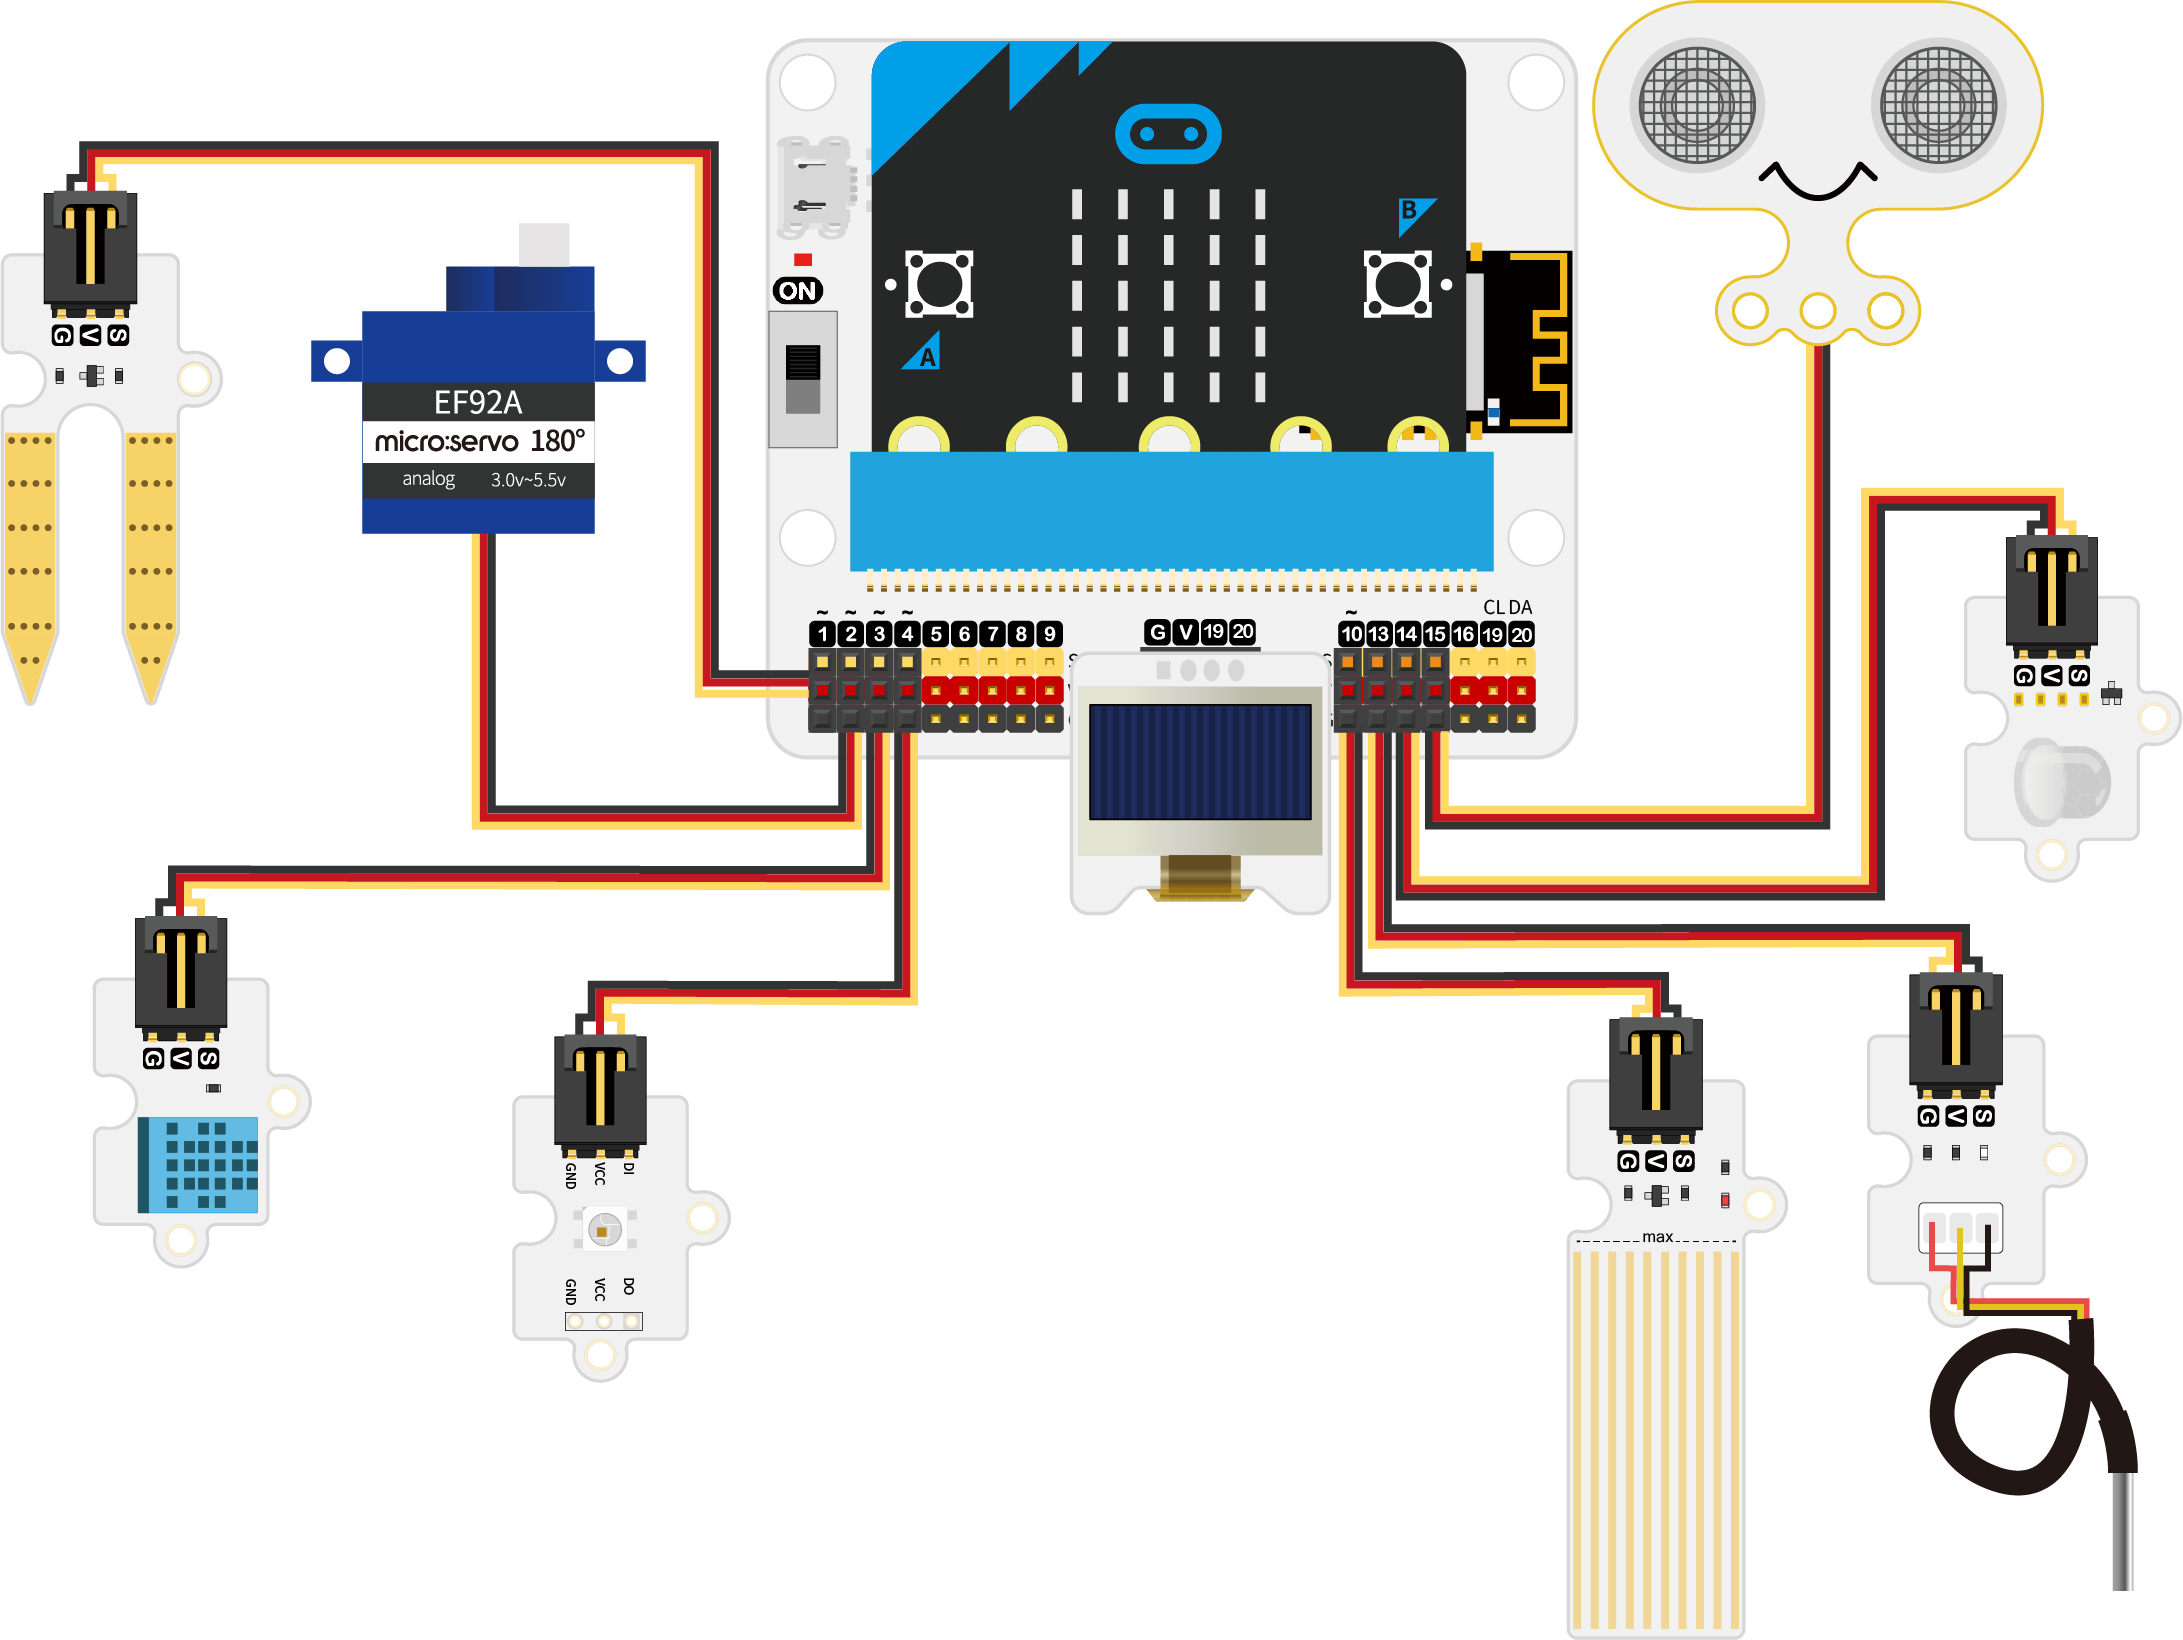 ../../_images/microbit-Smart-Agriculture-Kit-13-11.png